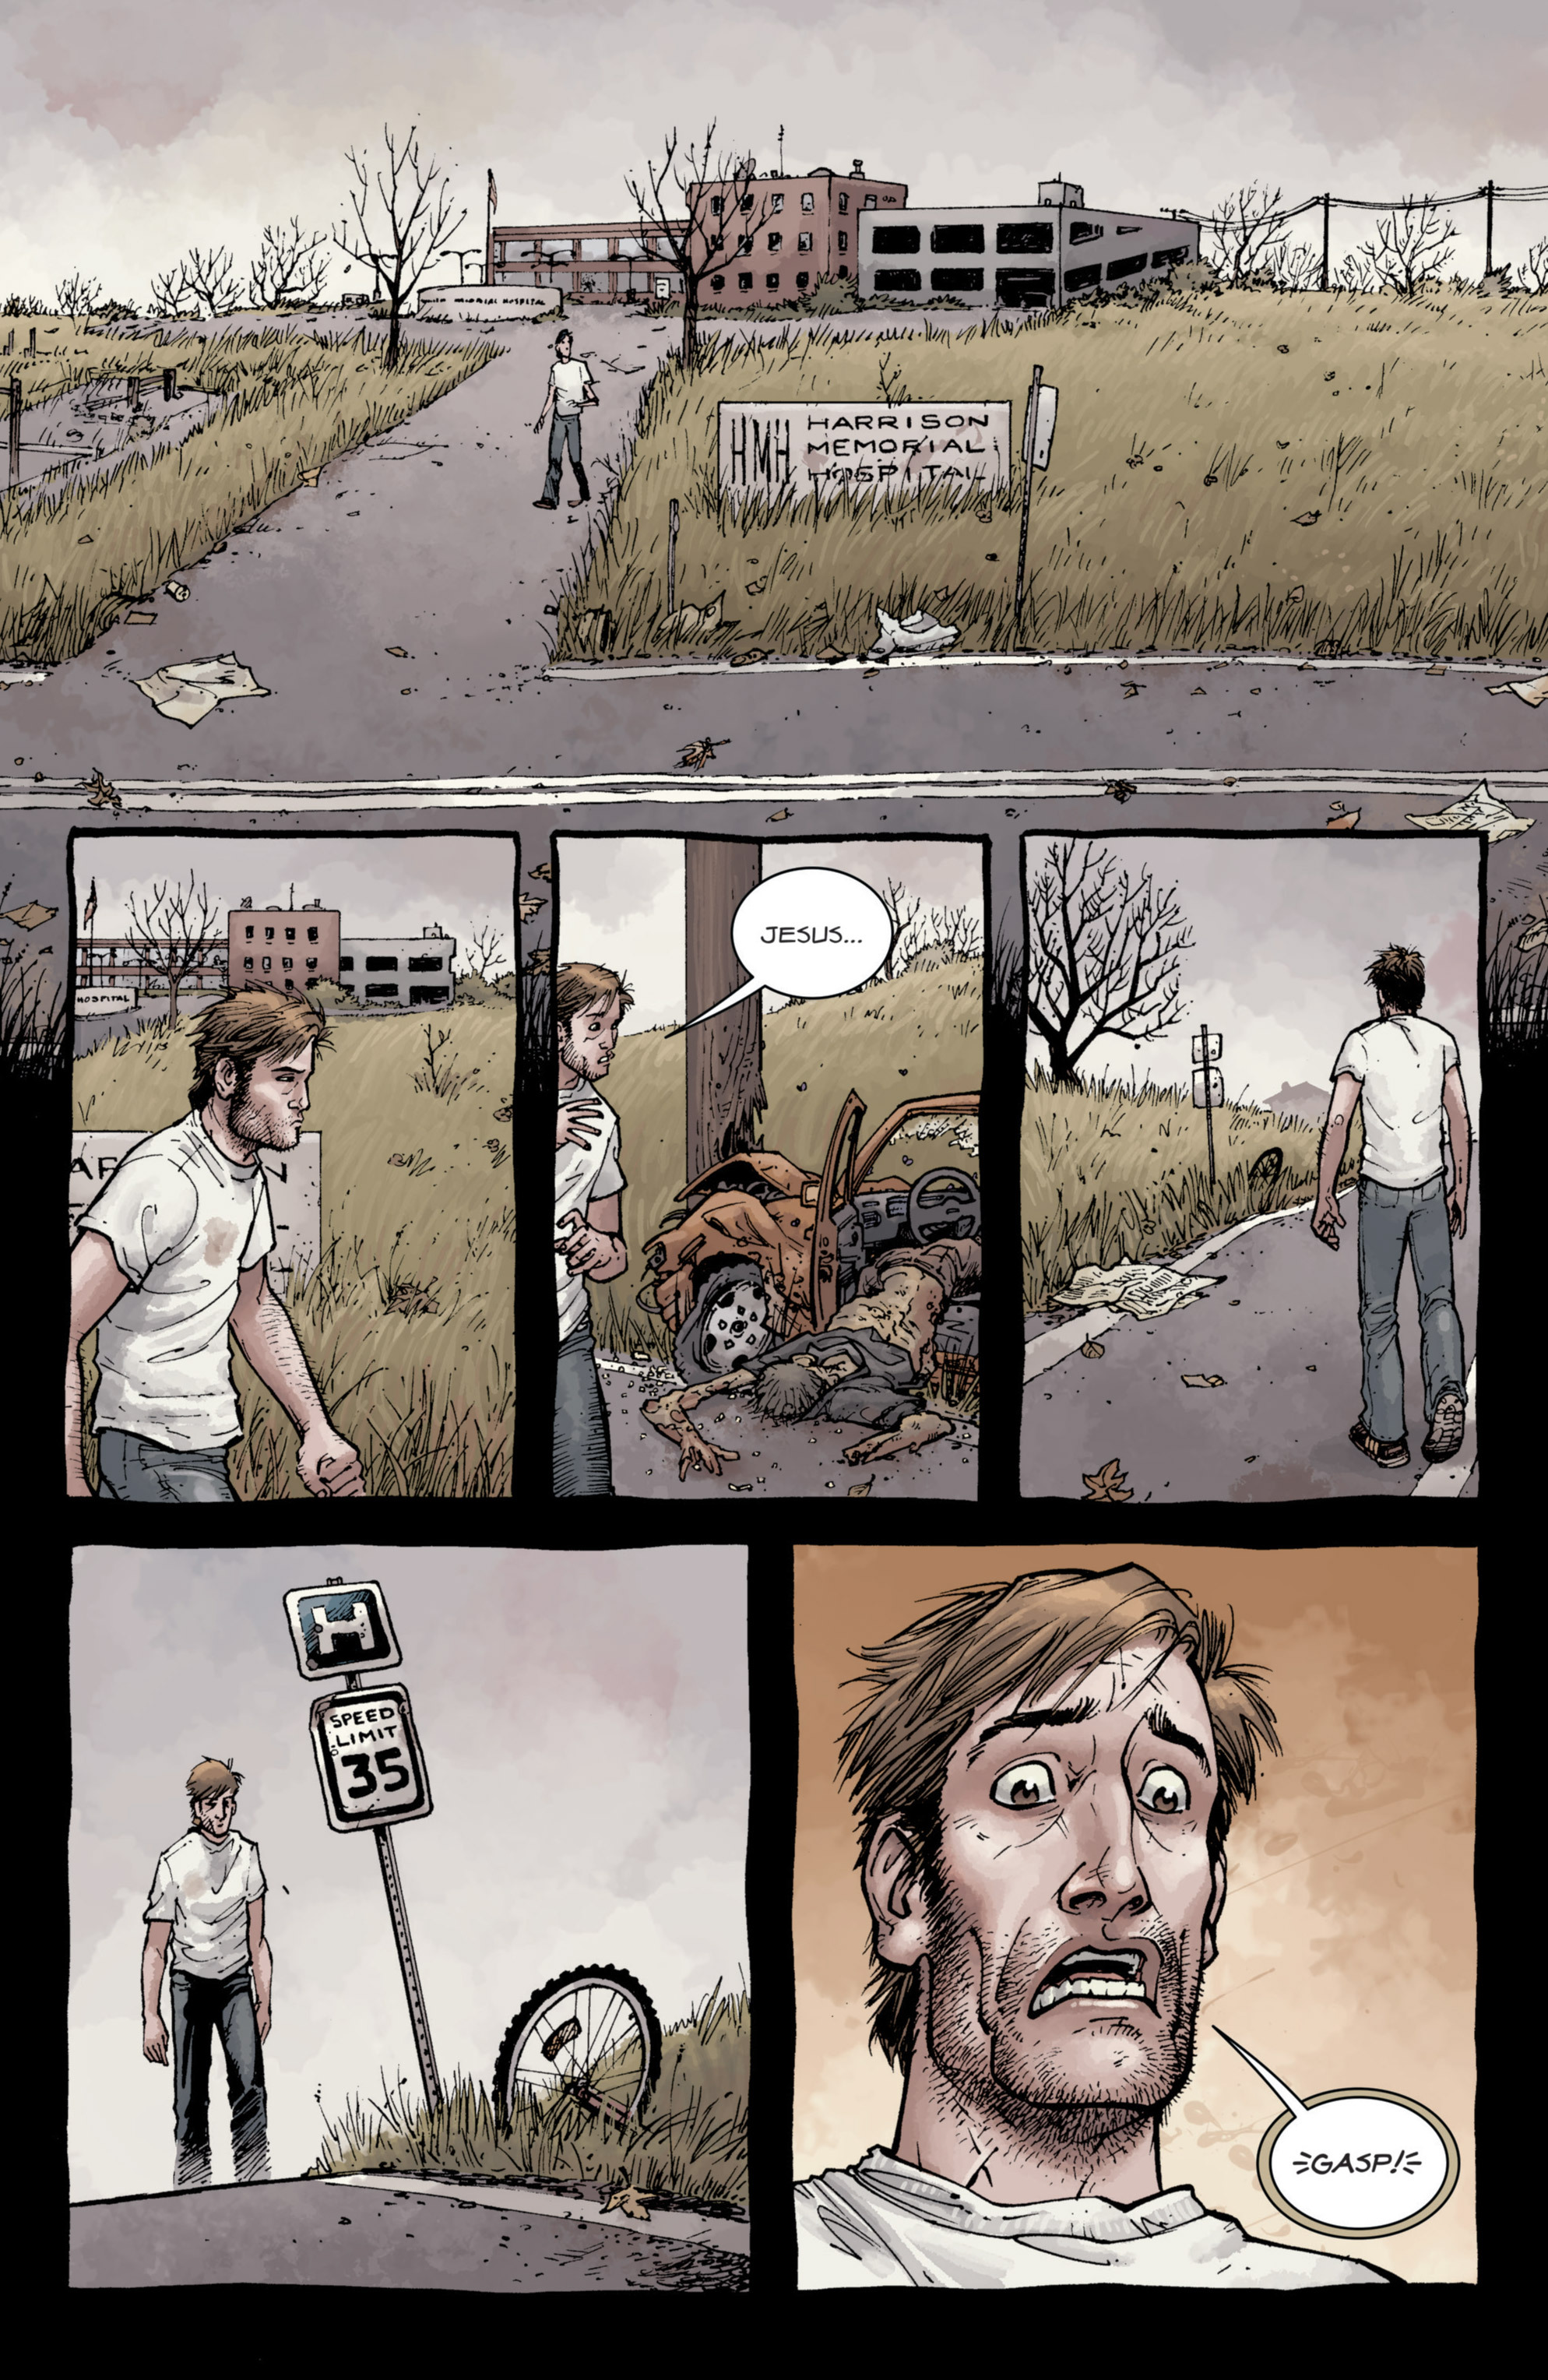 Read online The Walking Dead comic -  Issue # _Special - 1 - 10th Anniversary Edition - 11